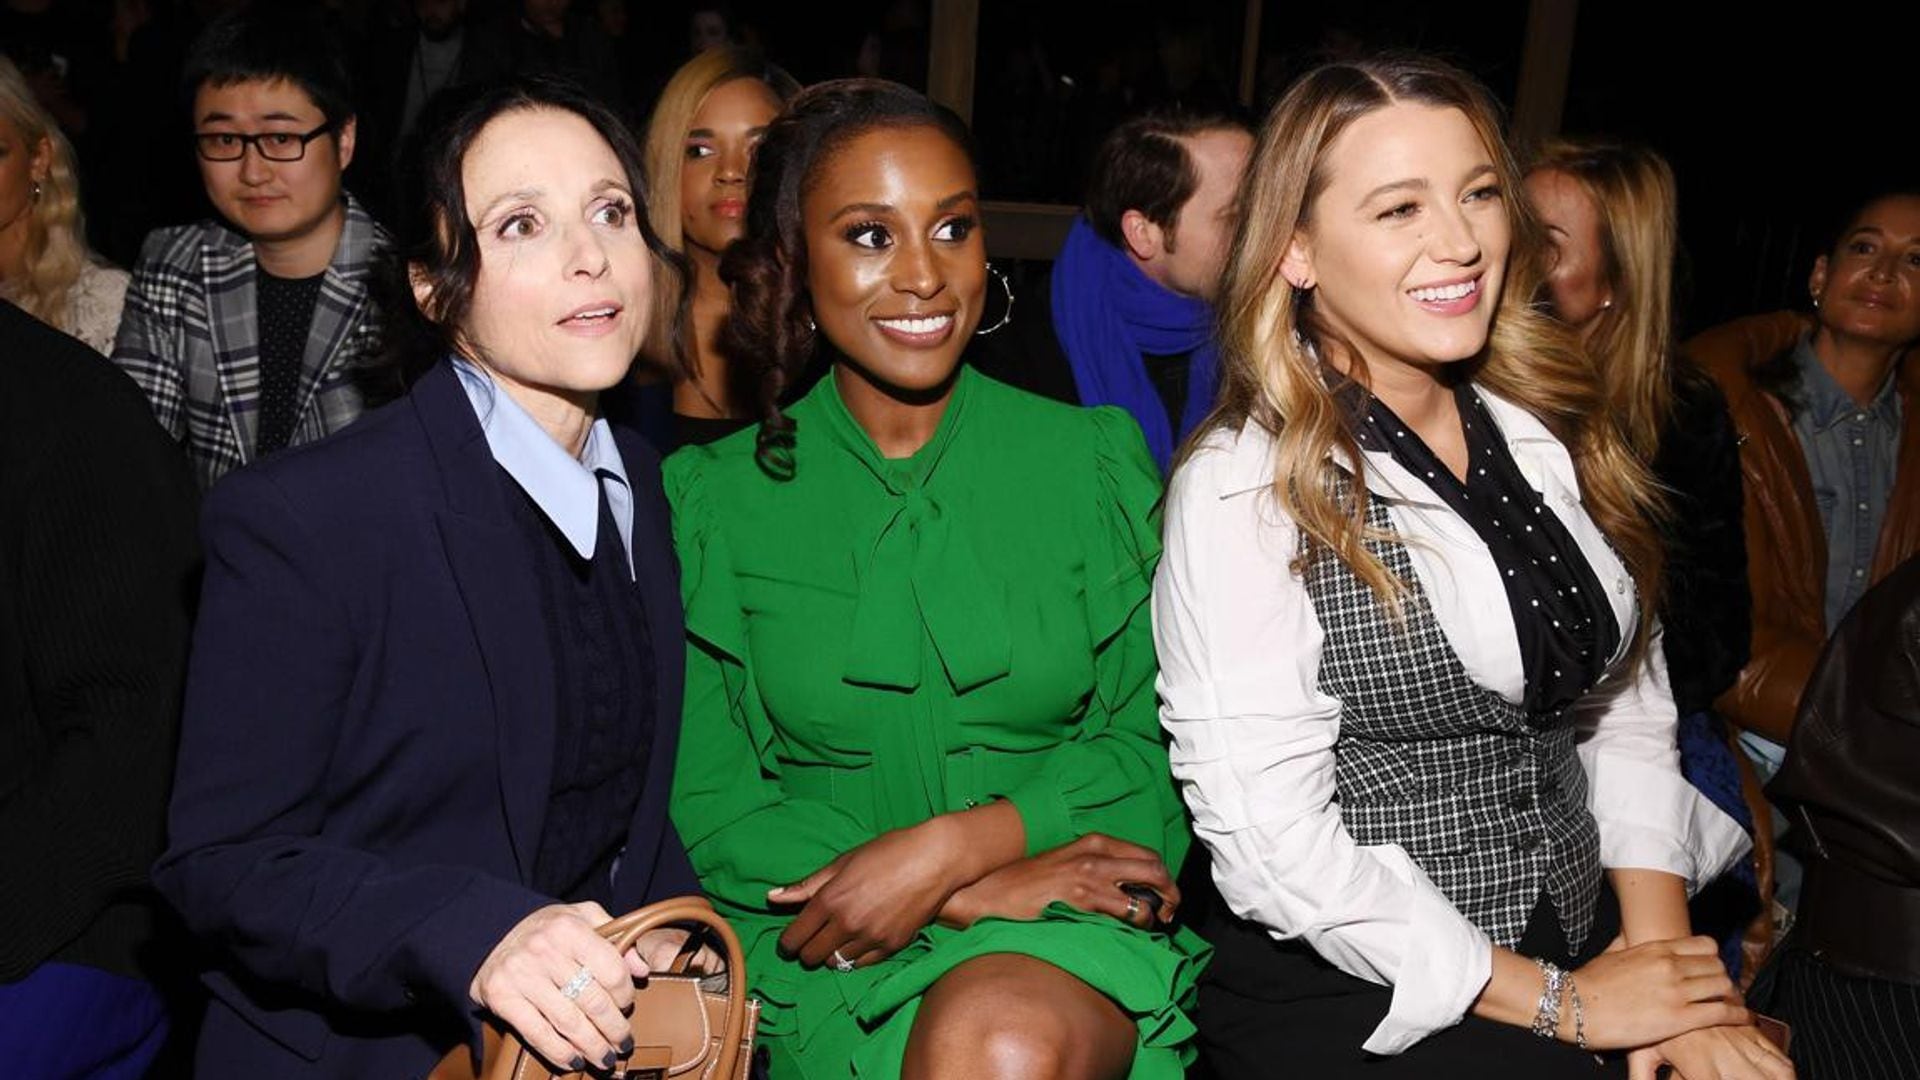 NYFW: Every must-see moment from the front row, backstage and parties